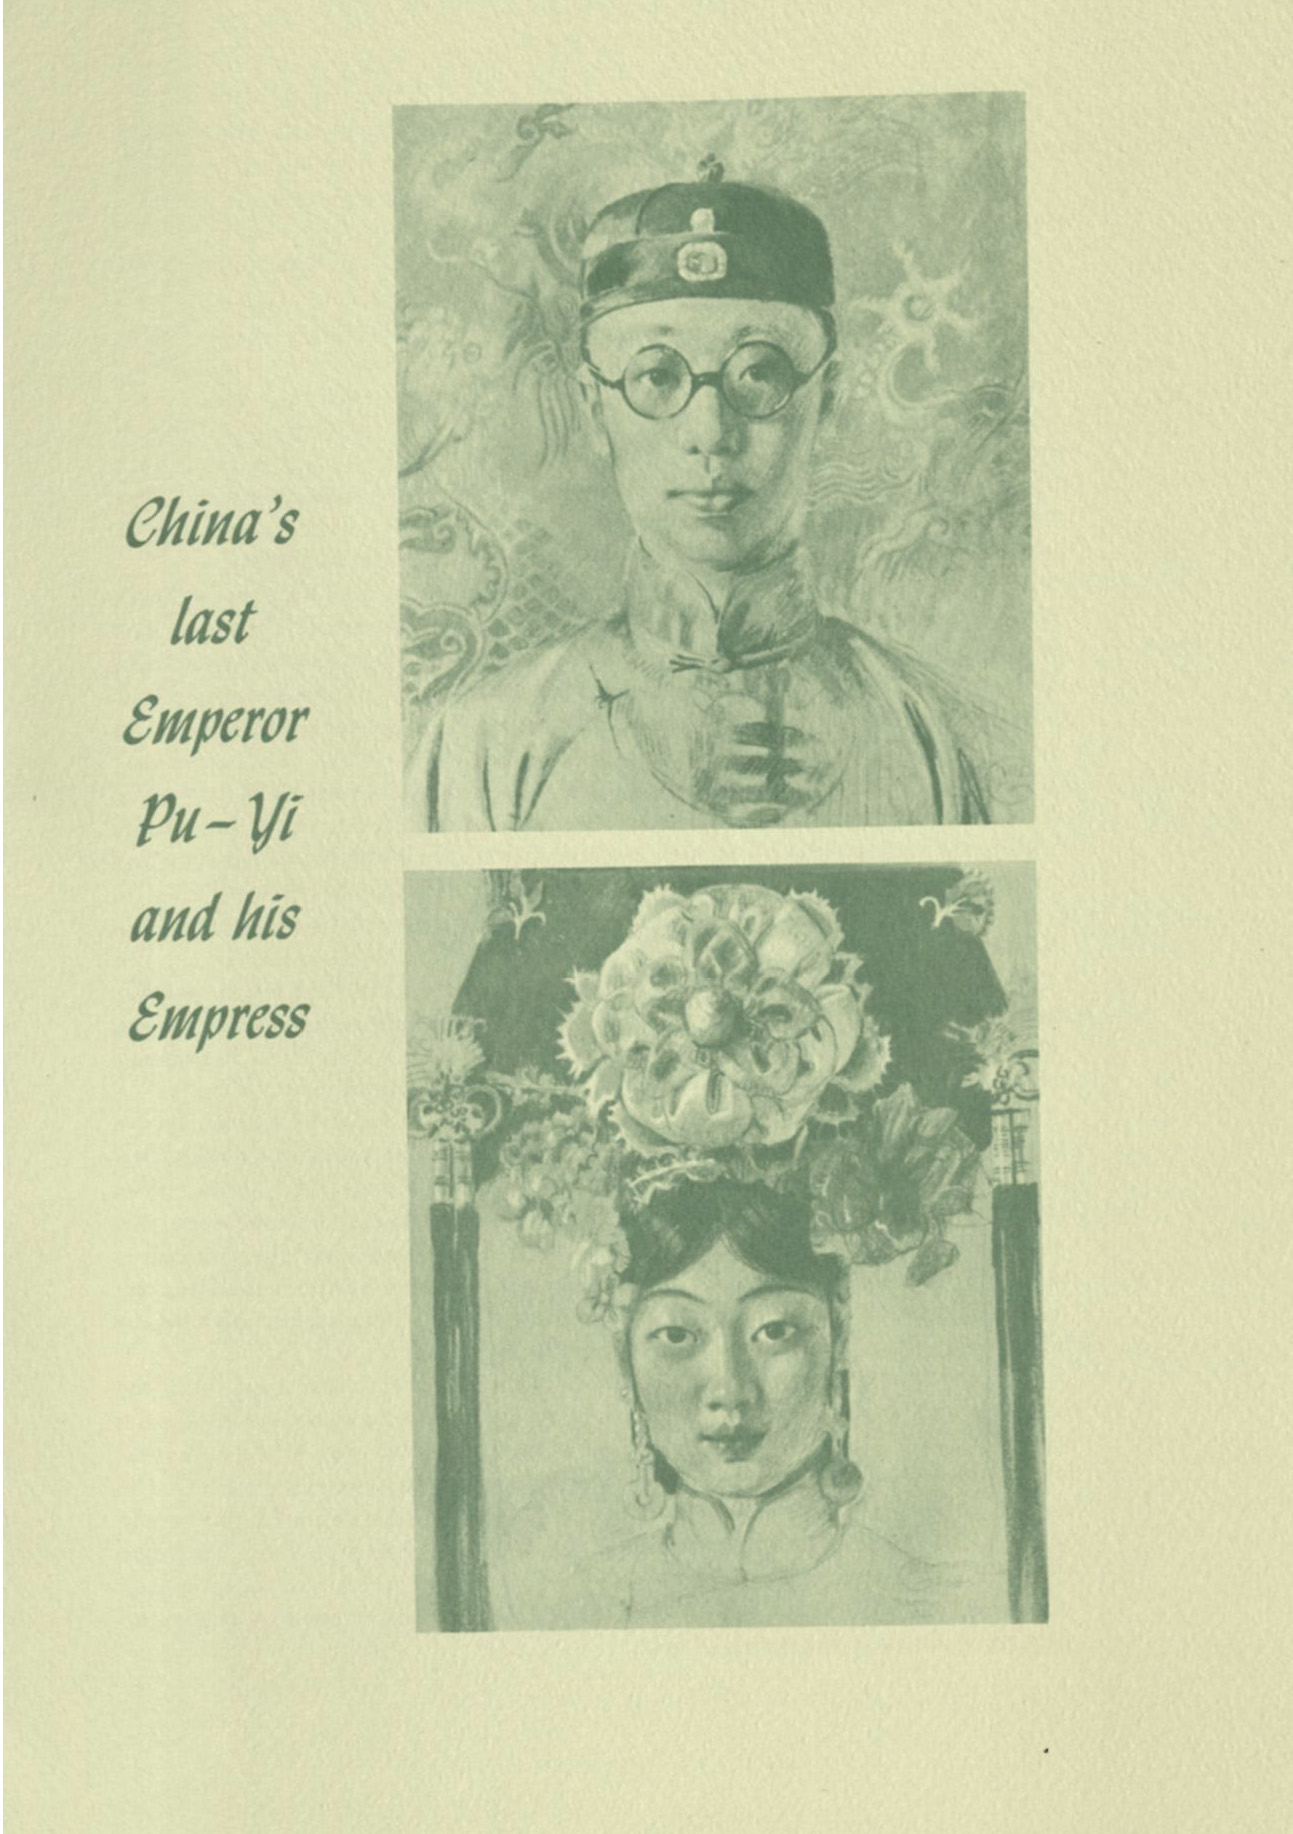 Green-tinged reproduction of a book page featuring two portraits: on top, a man in round glasses wearing a beanie-like cap; on bottom a woman with an elaborate flower headdress. Text to the right reads "China's last Emperor Pu-Yi and his Empress."